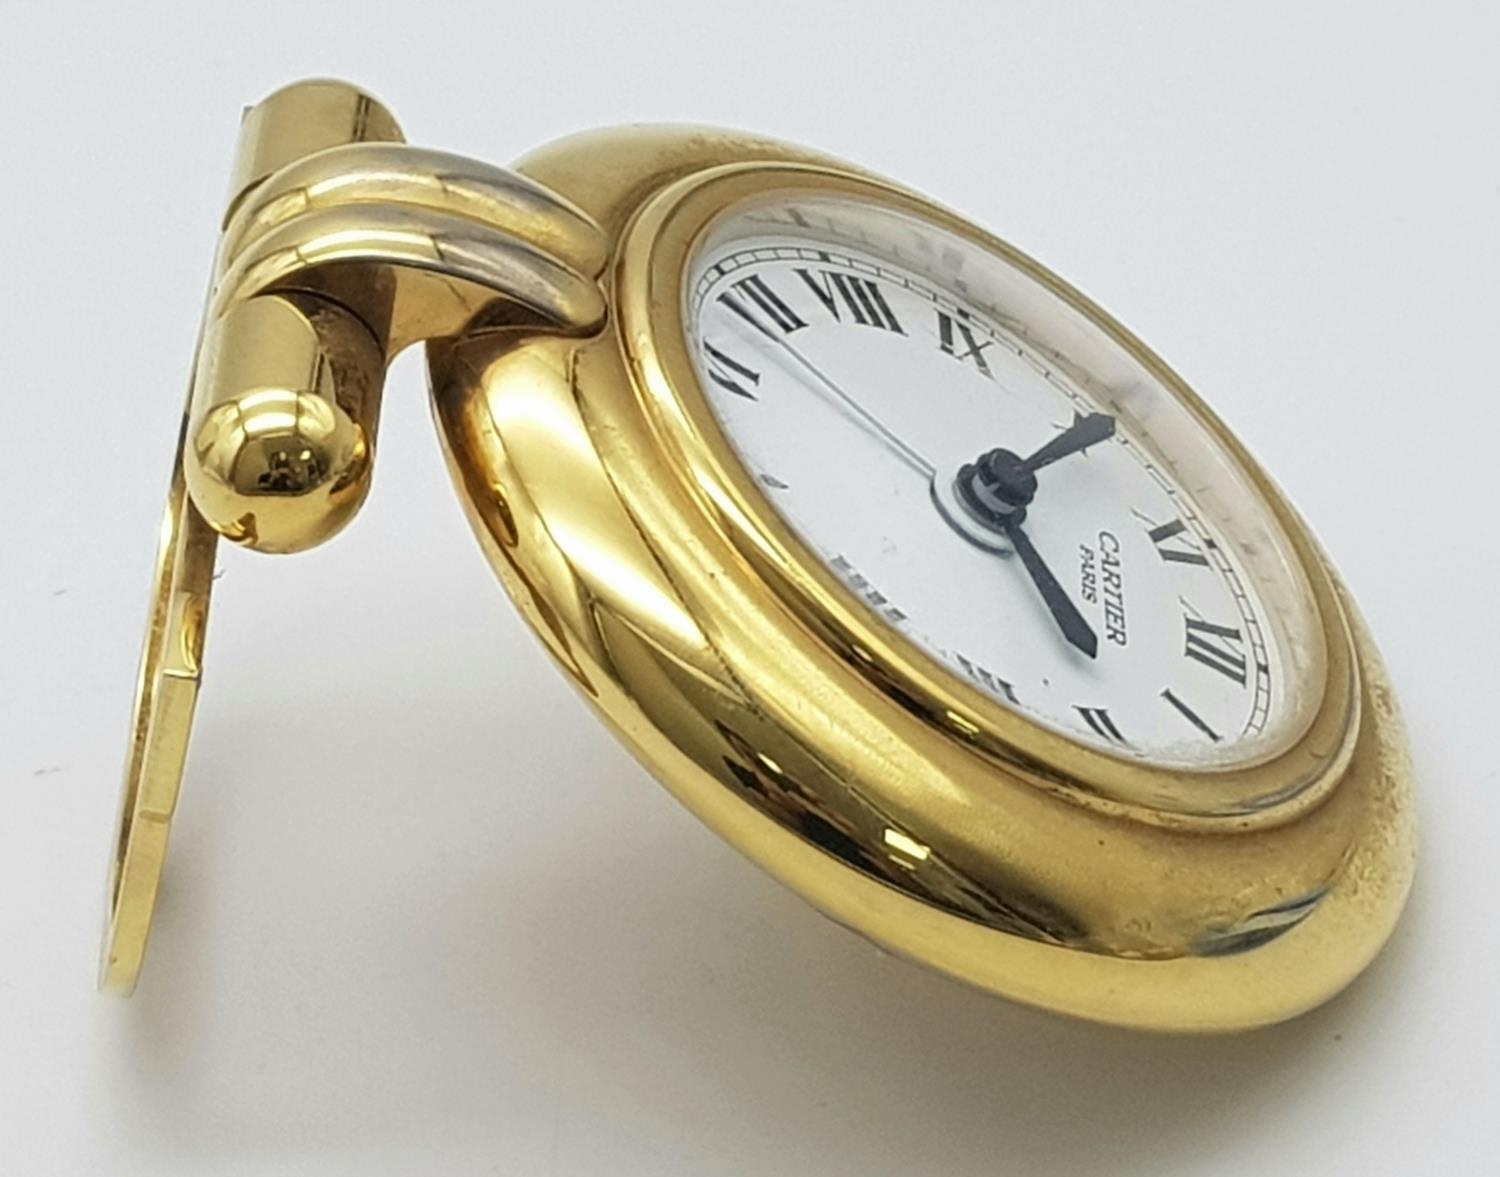 A Gold Plated Cartier Colisee Art Deco Travel Desk Clock. White dial with Roman numerals. 78mm - Image 3 of 8